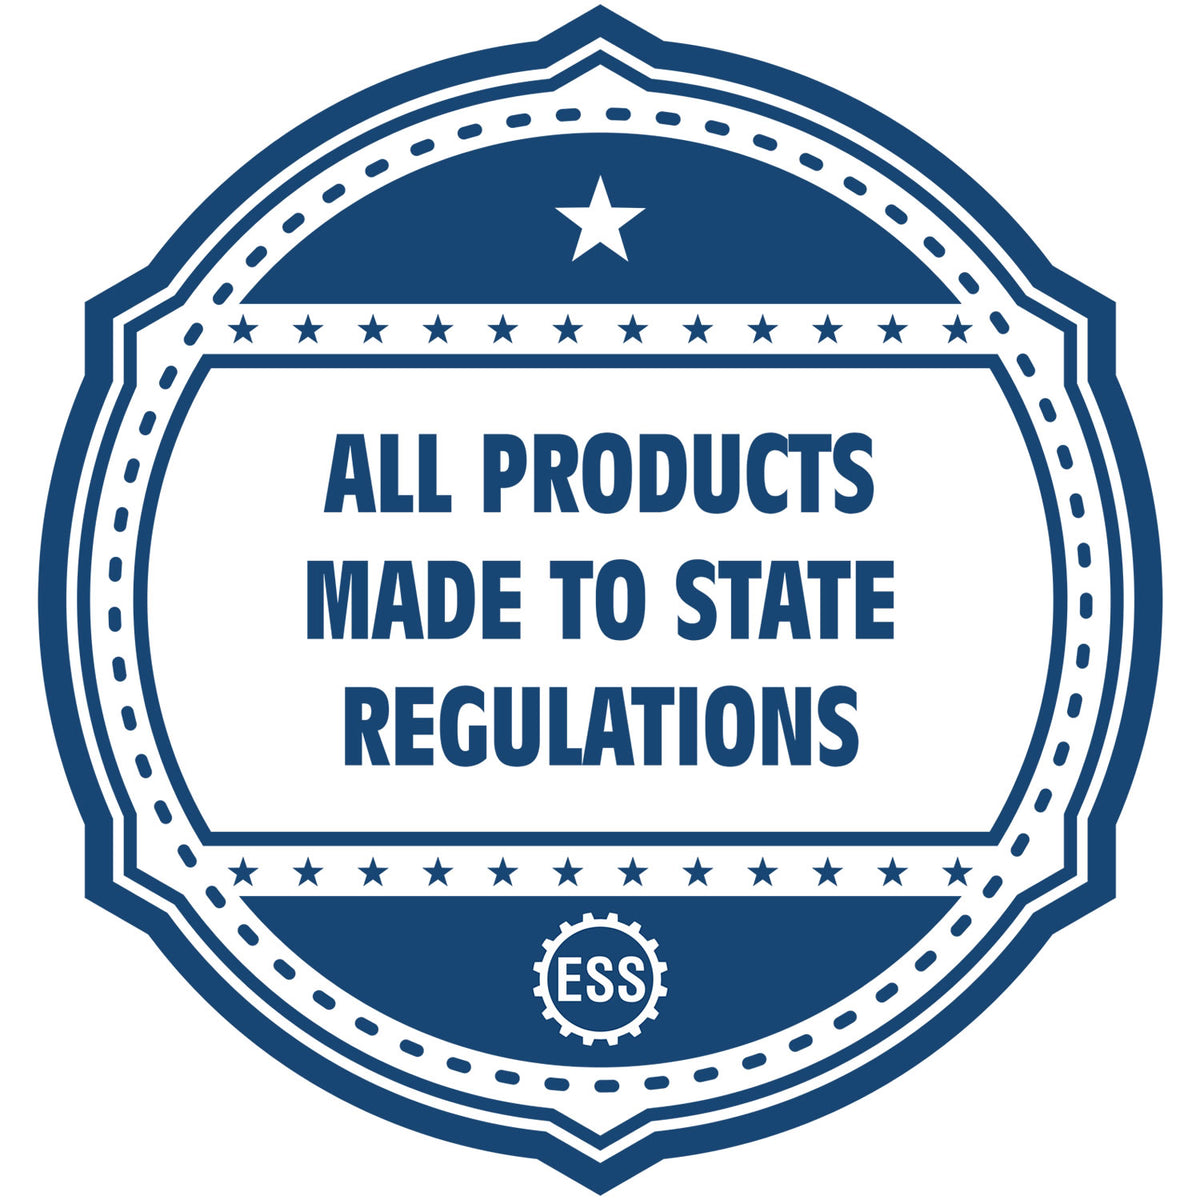 A blue icon or badge for the Hybrid South Carolina Landscape Architect Seal showing that this product is made in compliance with state regulations.